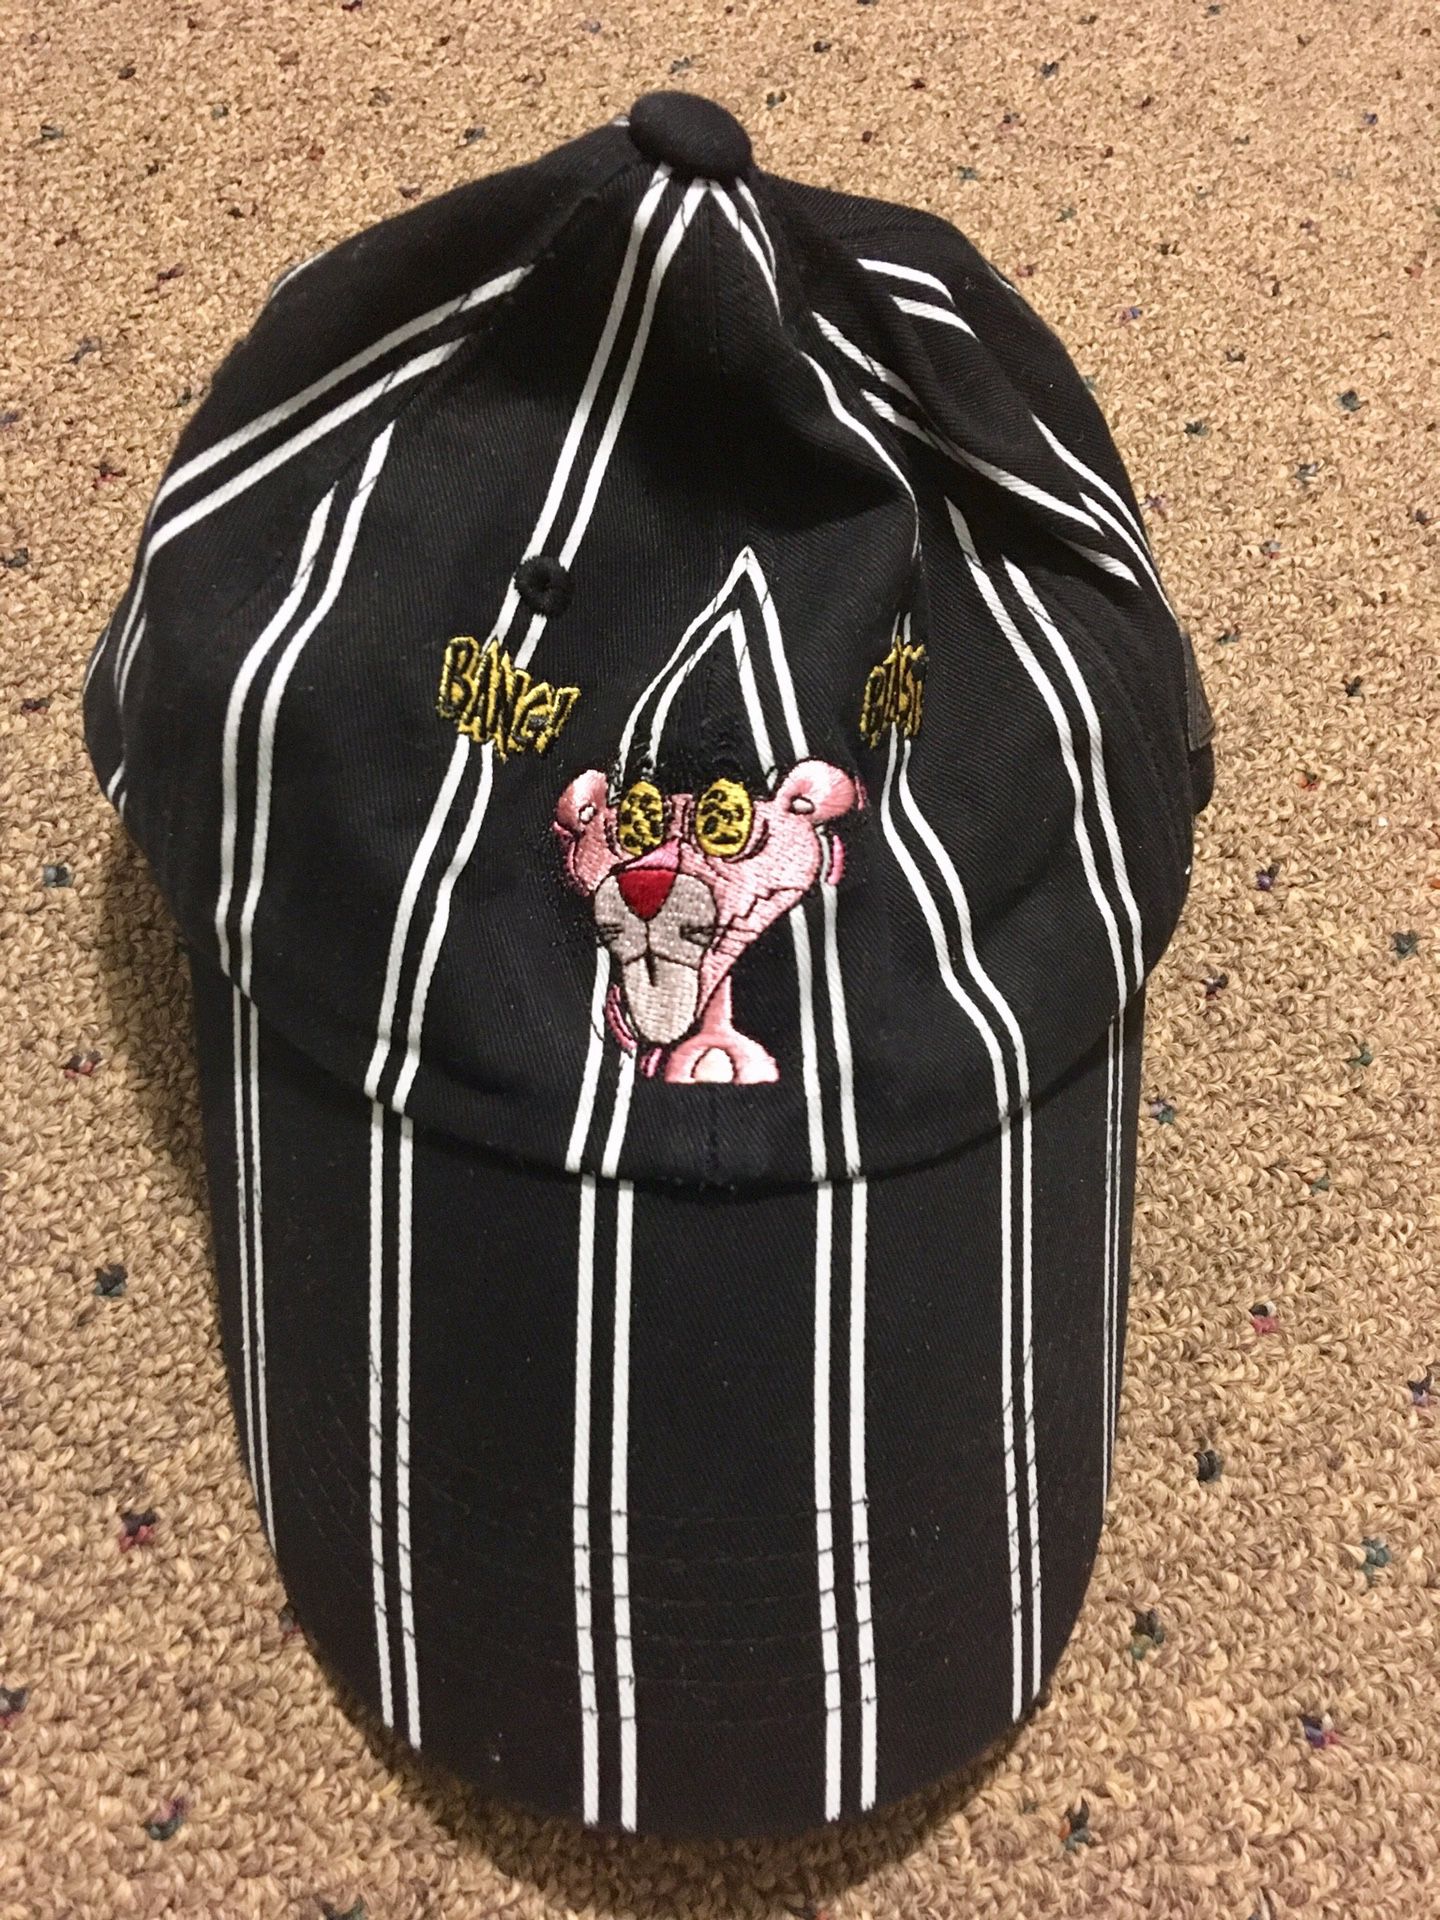 Pink panther black and white striped hat ORIGINAL